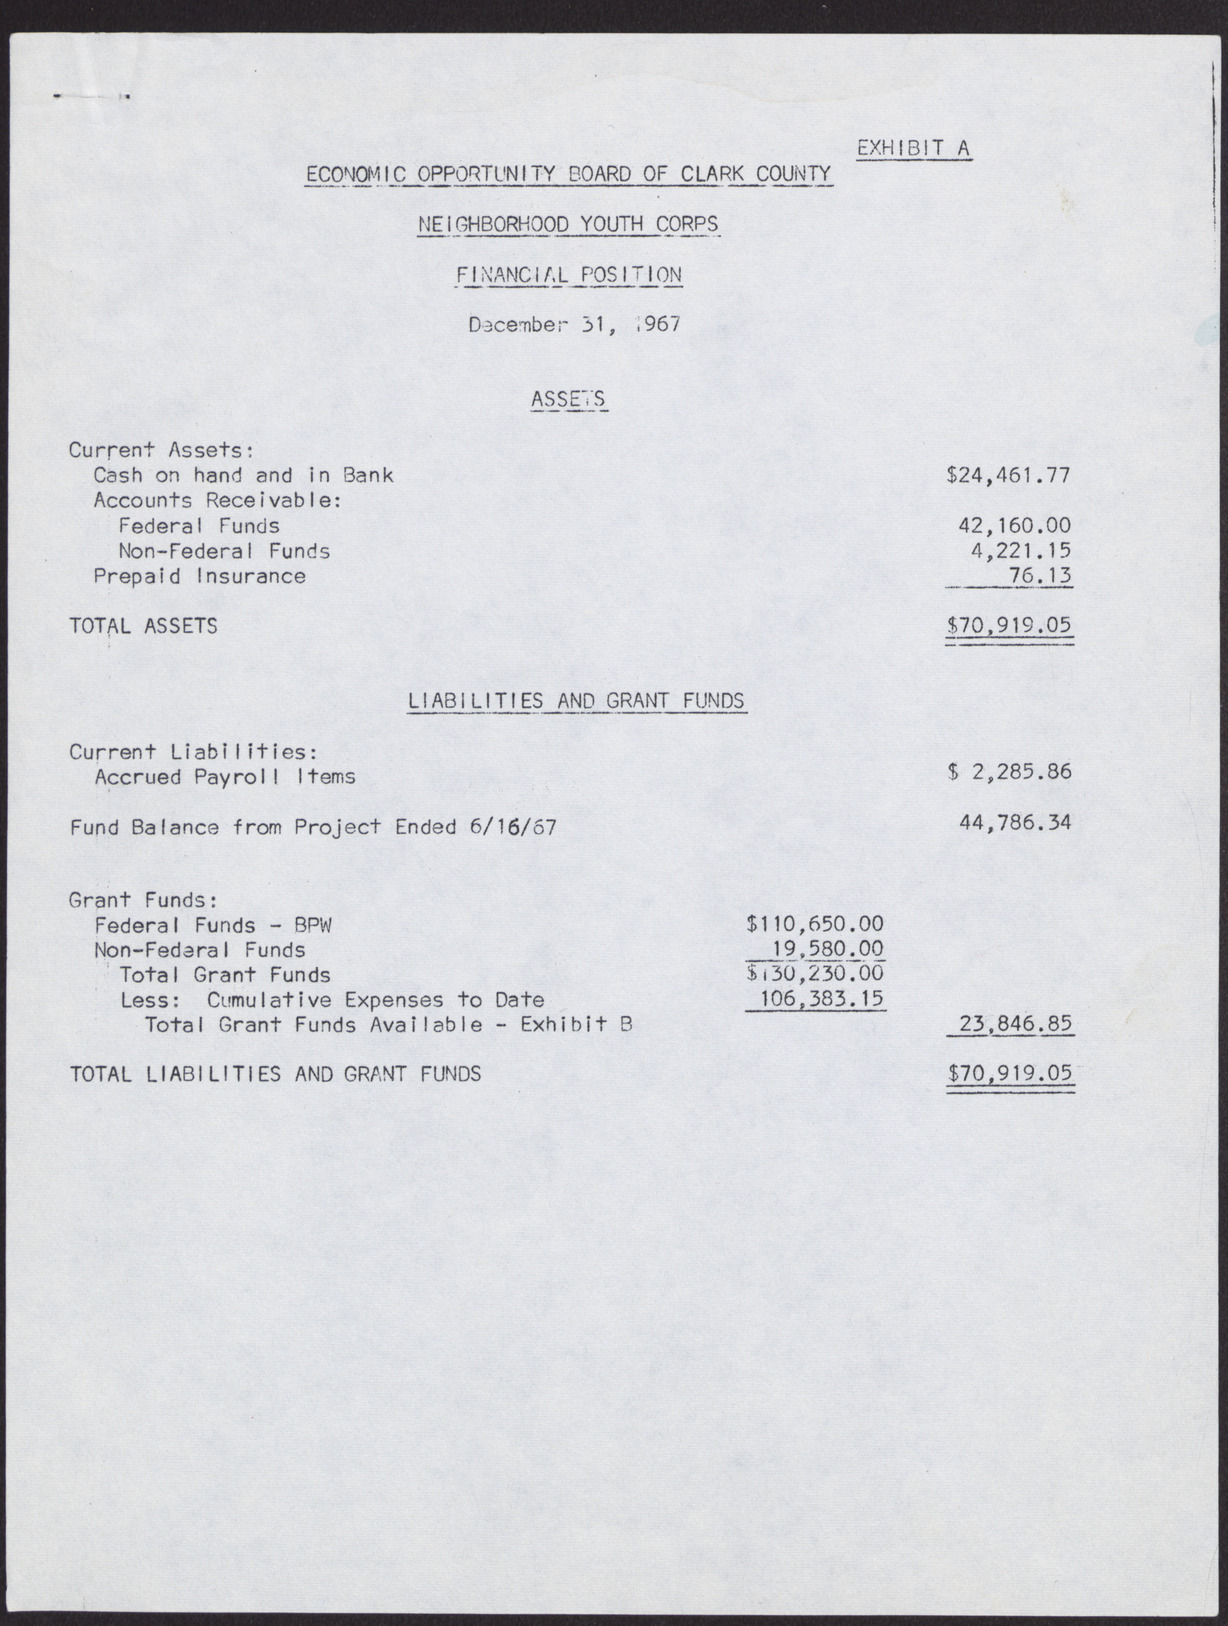 Economic Opportunity Board of Clark County Neighborhood Youth Corps Financial Position, Statement of Budgeted and Actual Expenditures, and Schedule of Checks Written (3 pages), December 1967